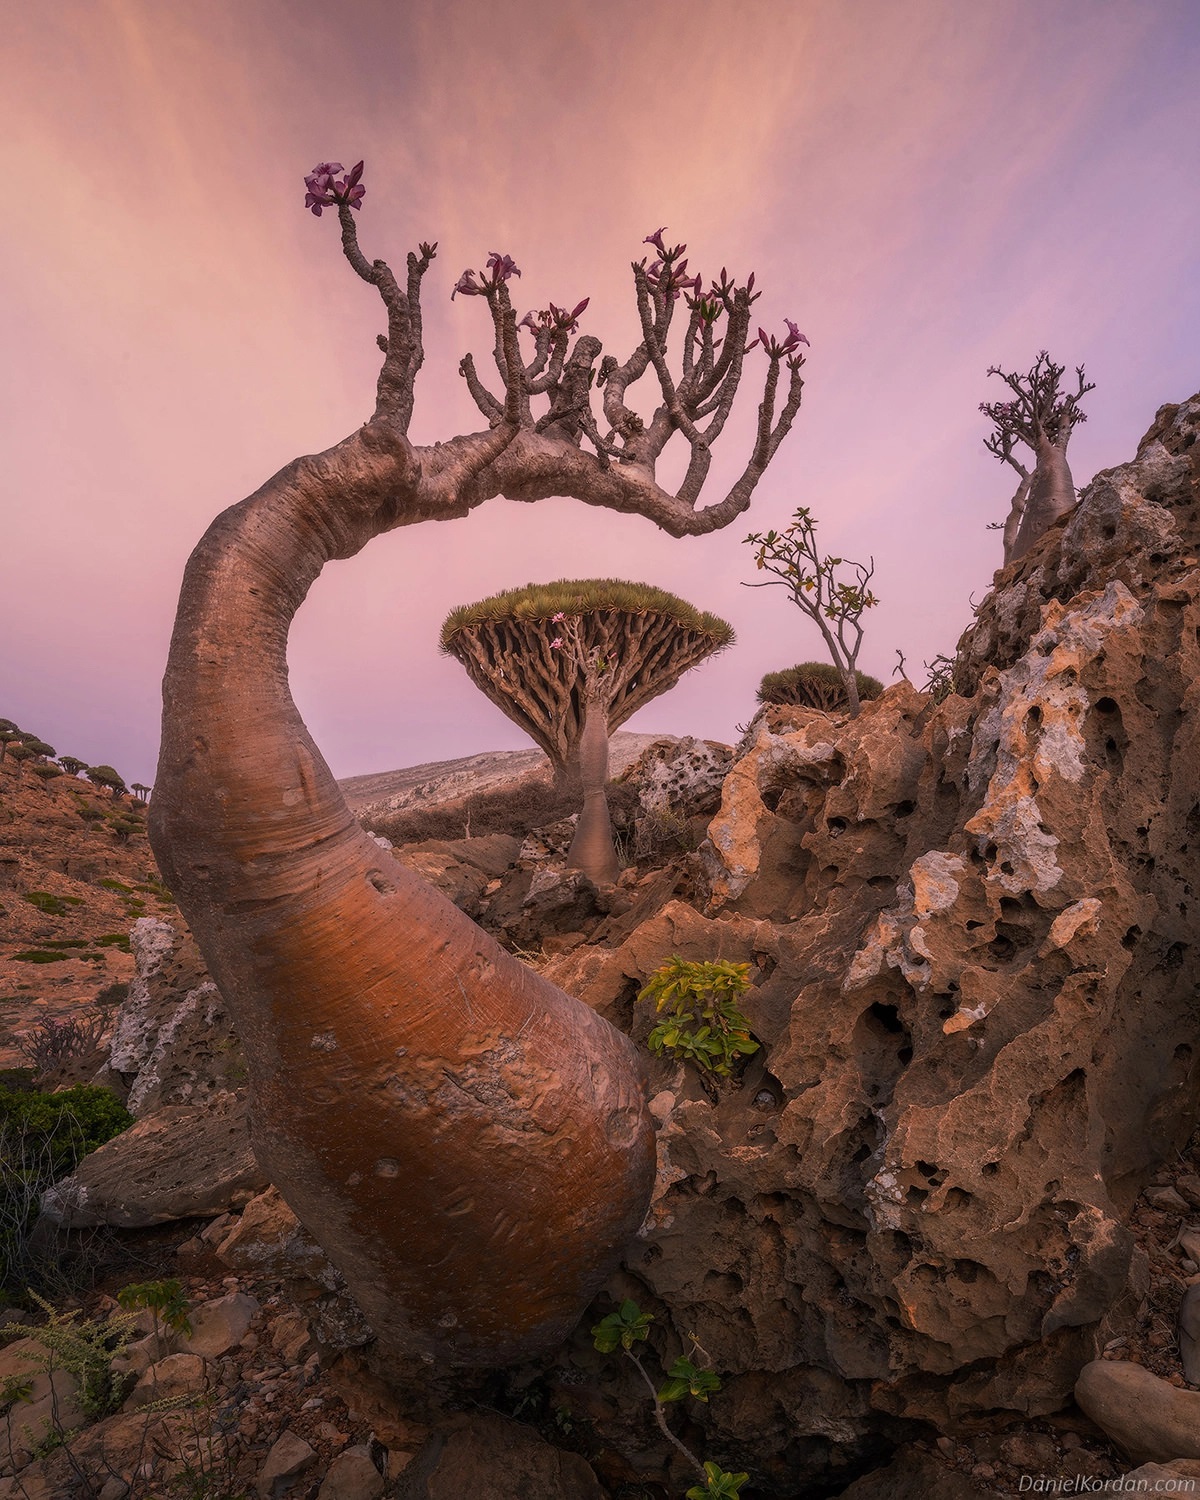 The Majestic Beauty of Dragon's Blood Tree of Socotra through the lens of Daniel Kordan